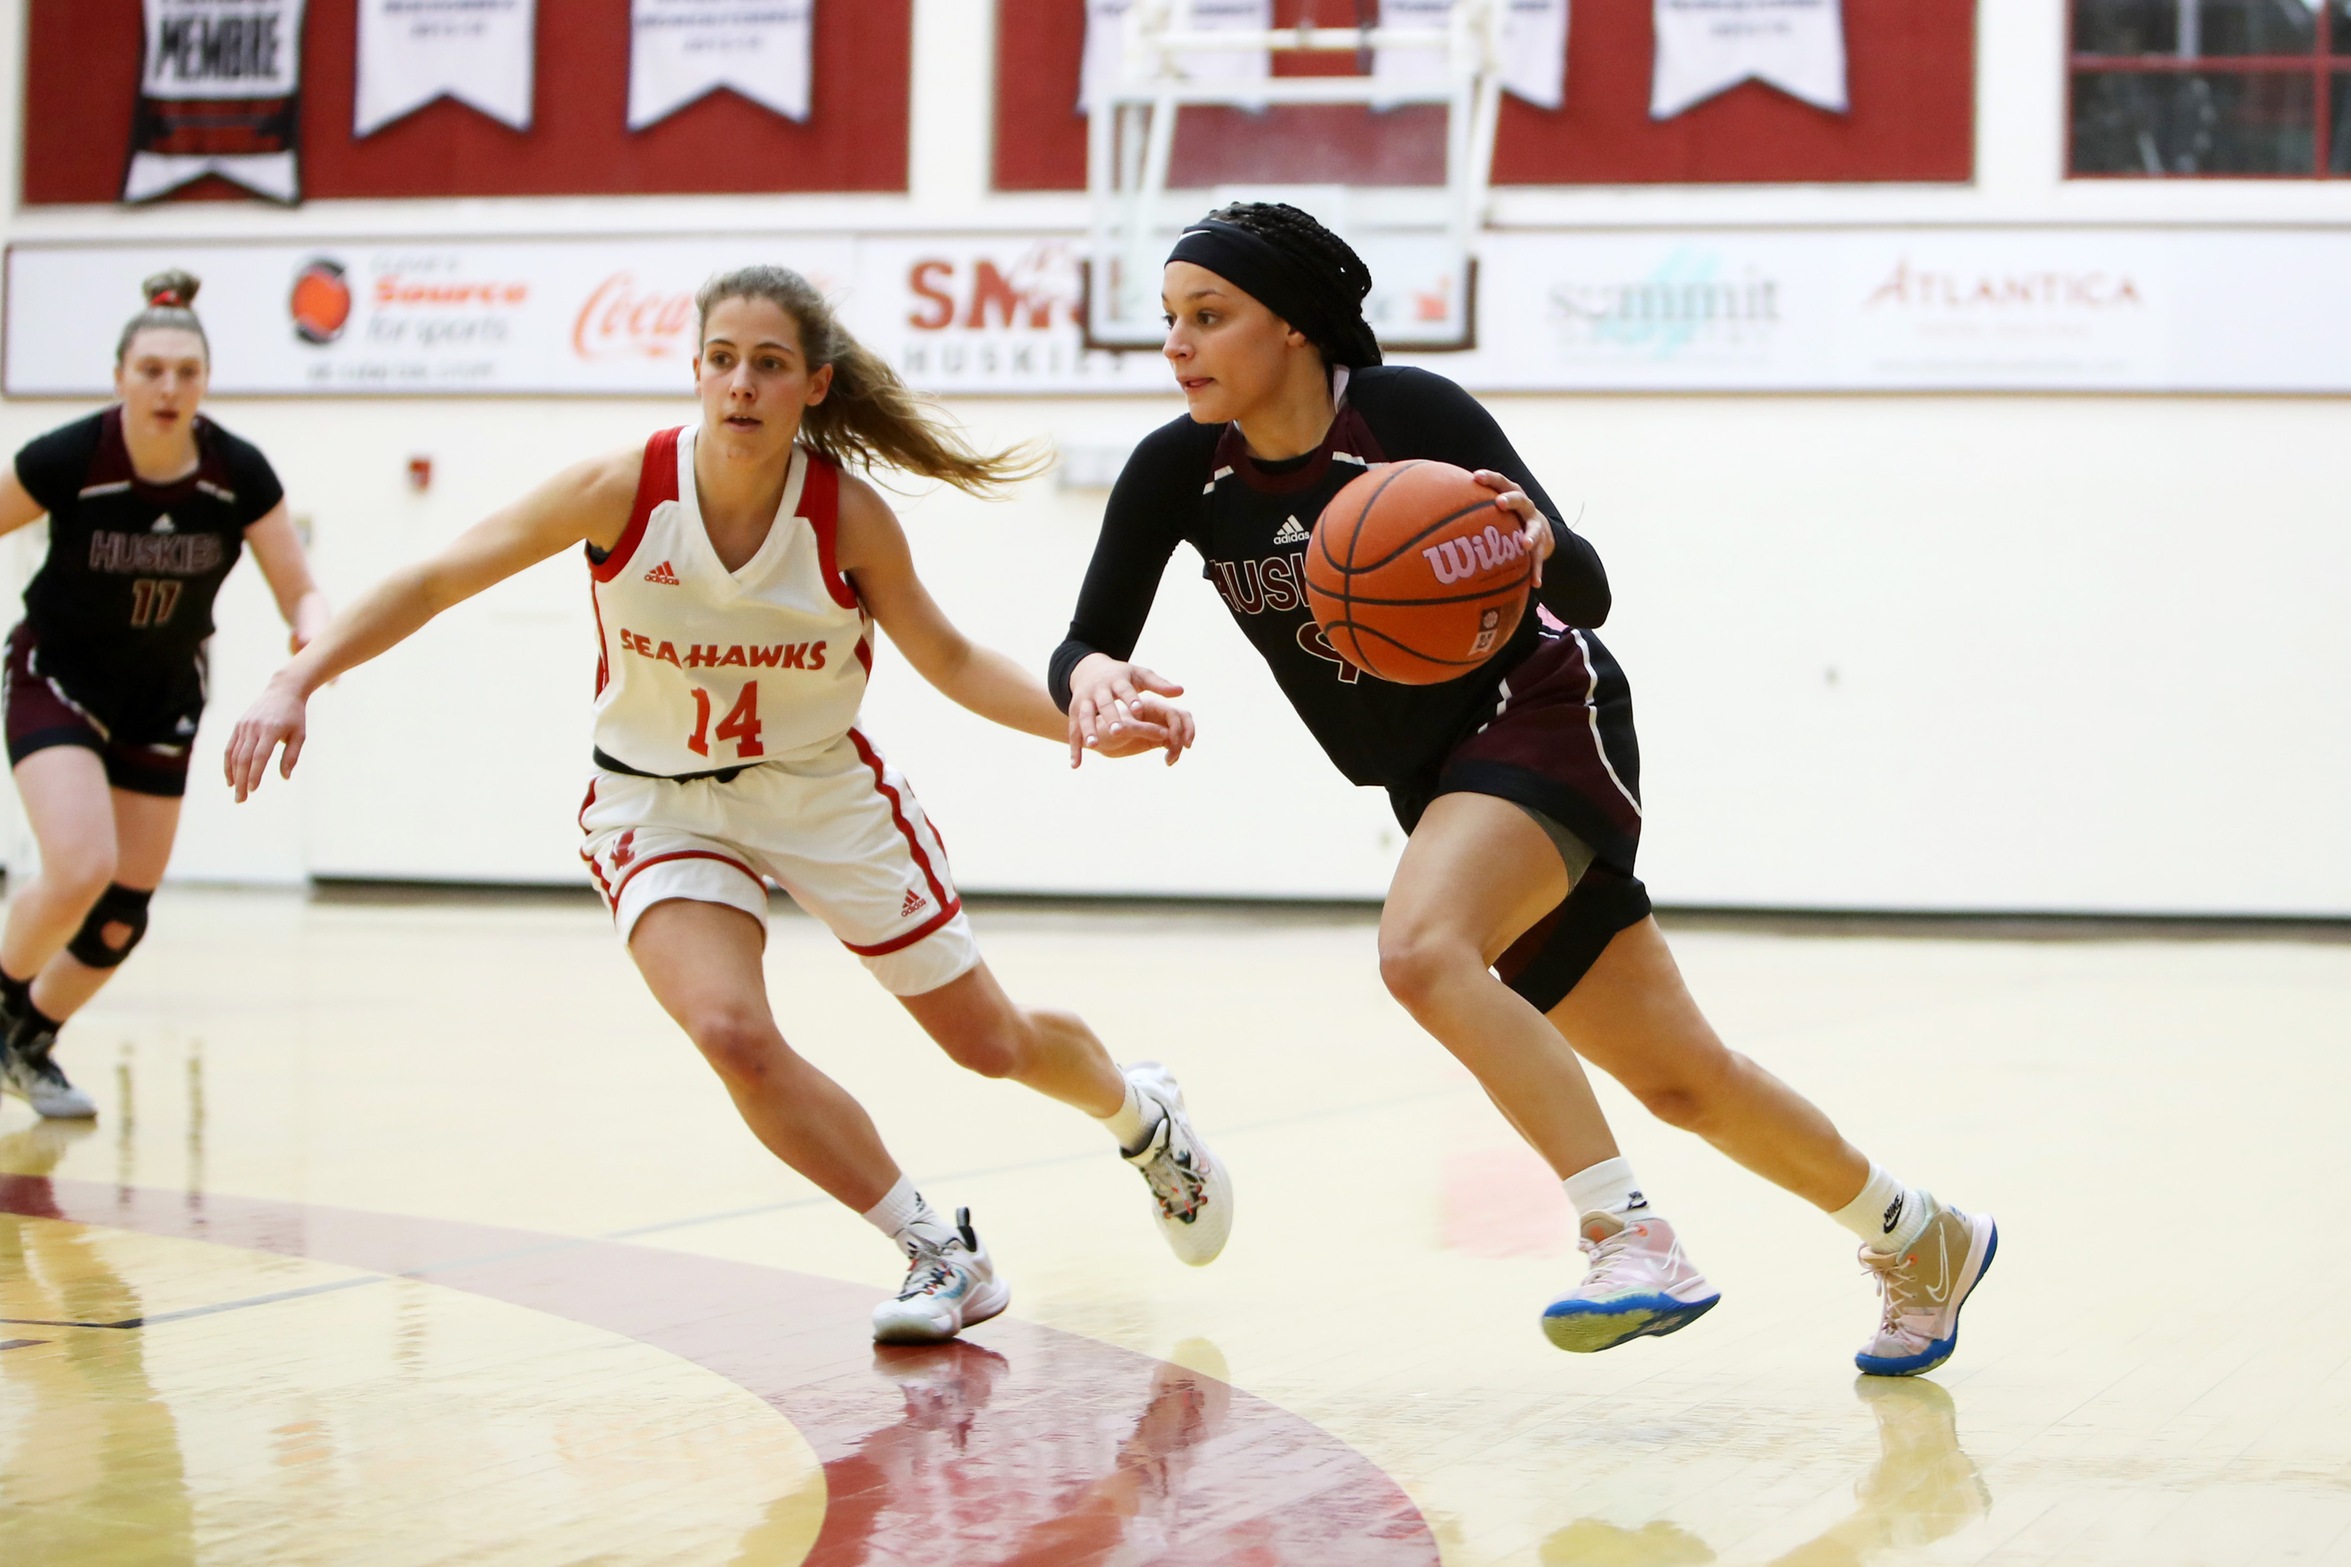 Huskies guard Alaina McMillan drives against the Memorial Sea-Hawks on March 6, 2022. McMillan scored a game-high 22 points and was named Subway Player of the Game. (Photo by Nick Pearce / SMU Huskies Athletics)